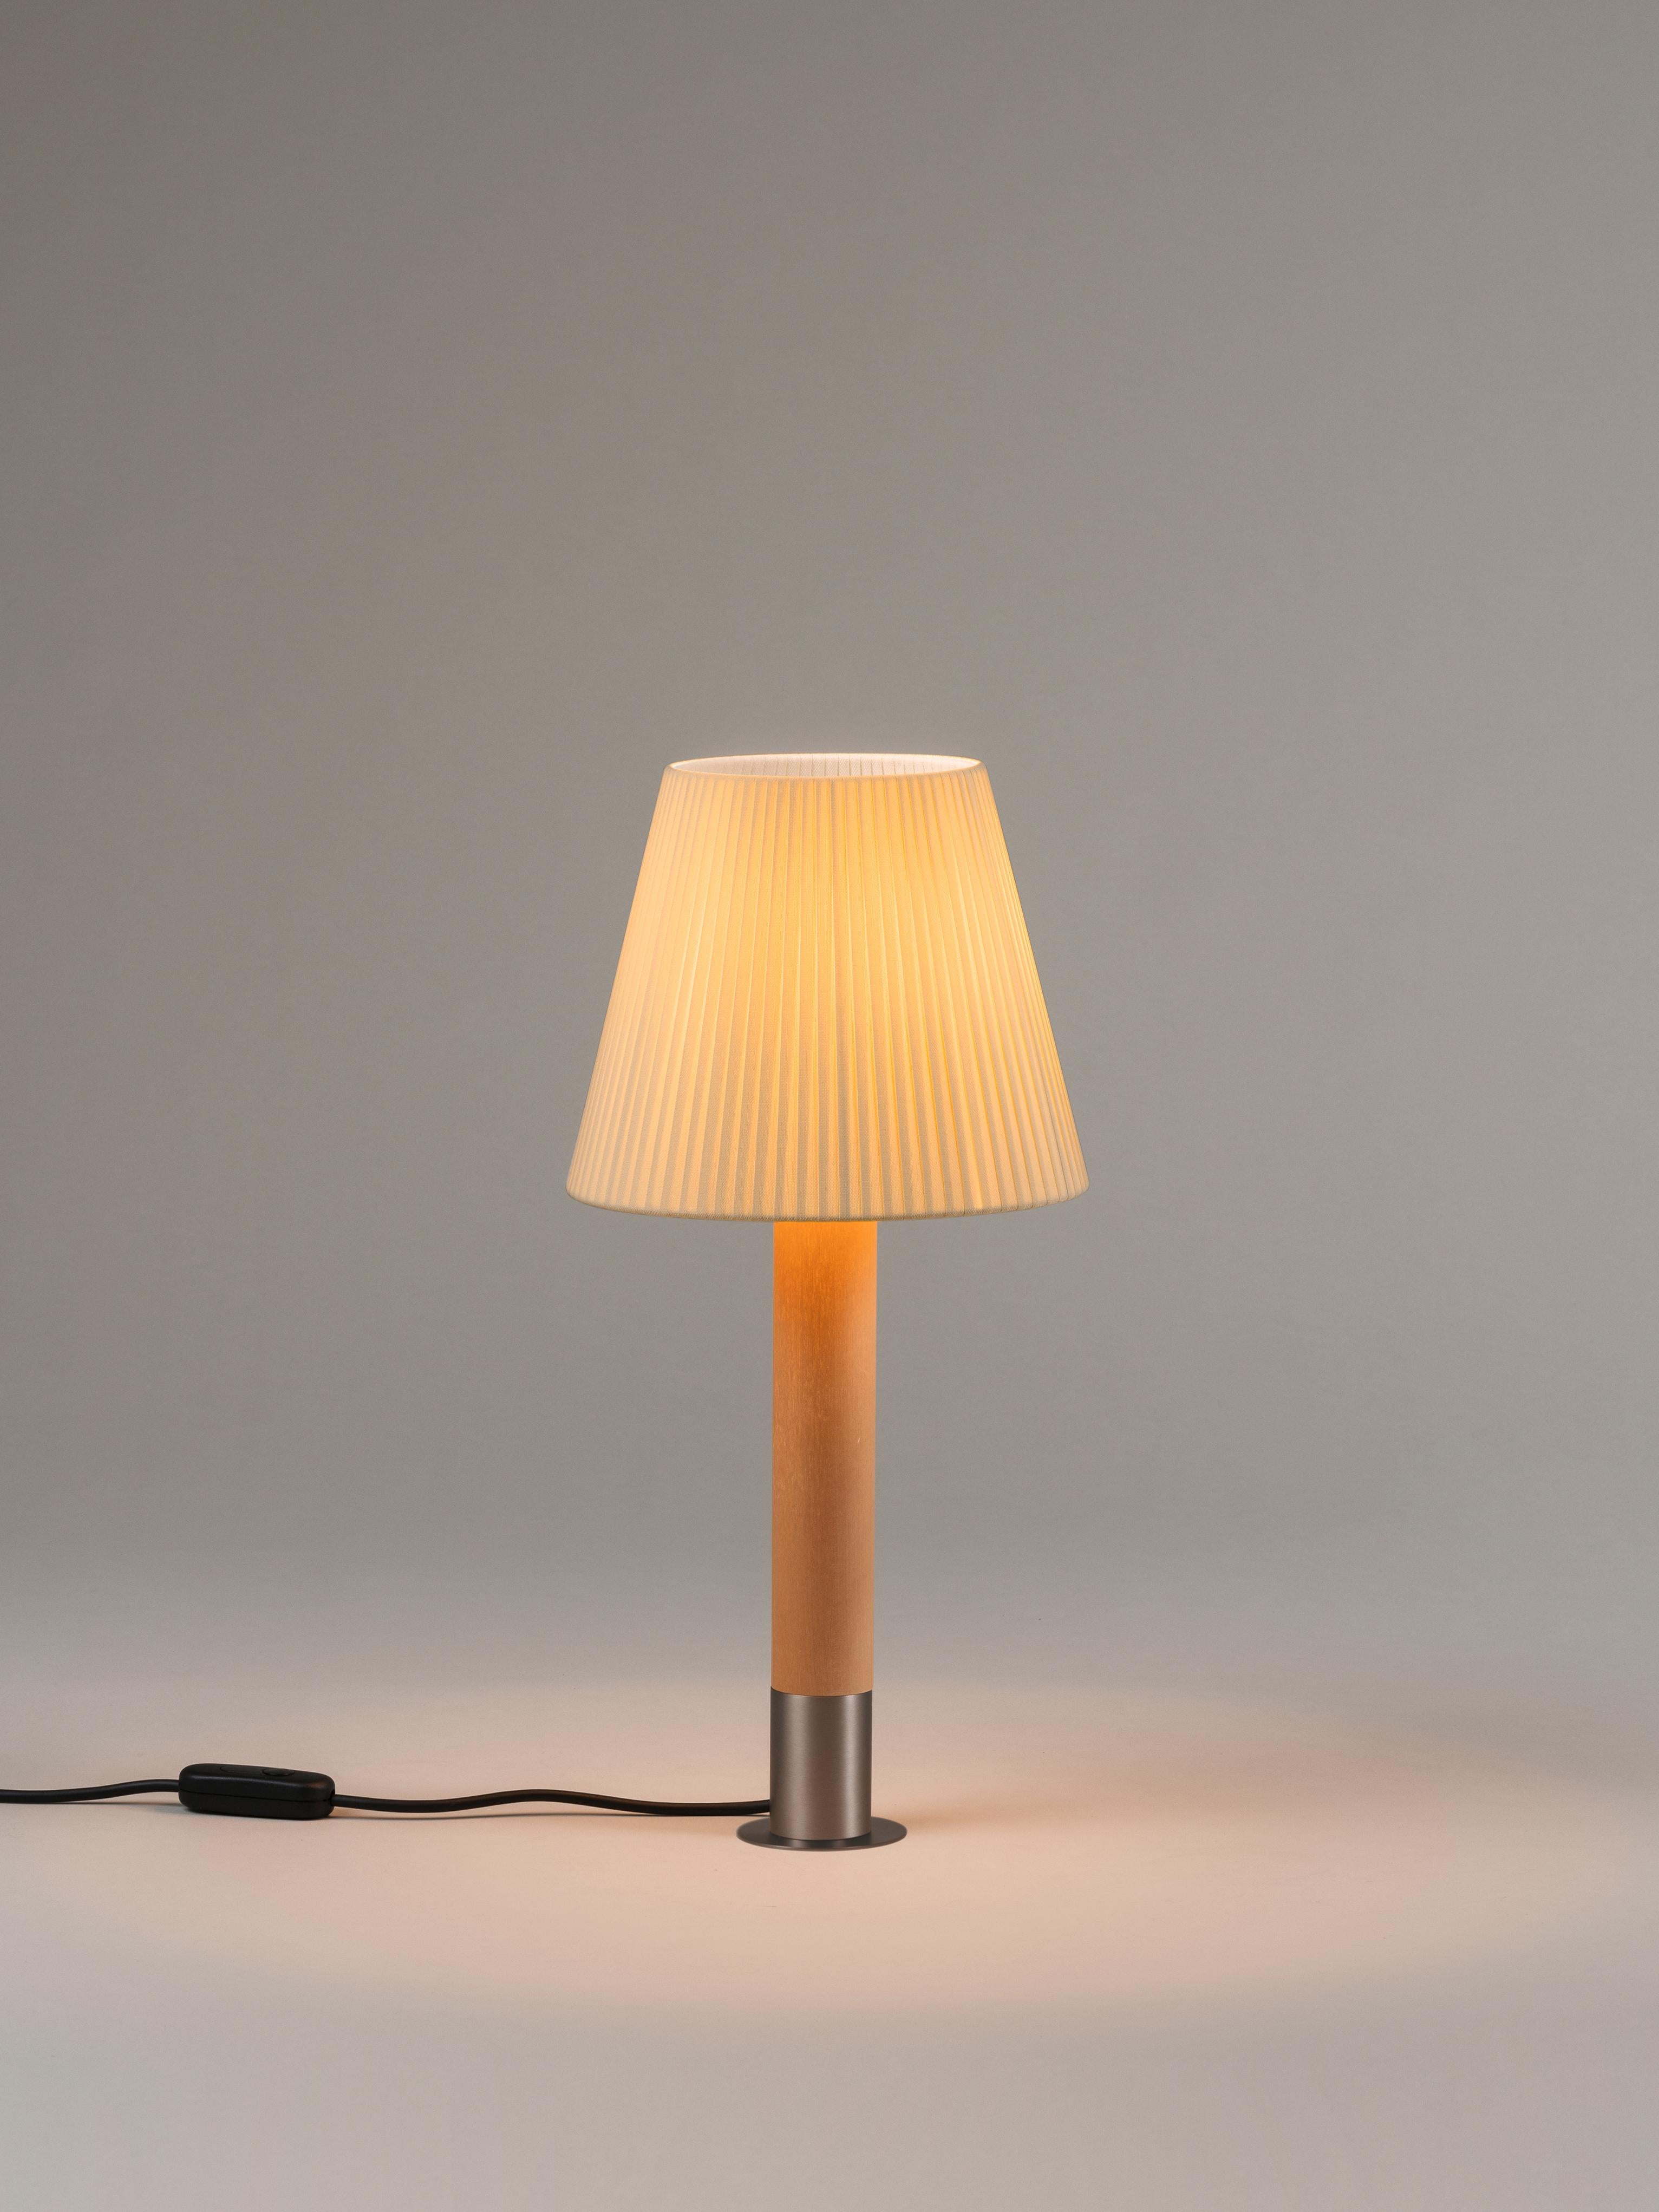 Nickel and natural Básica M1 table lamp by Santiago Roqueta, Santa & Cole
Dimensions: D 25 x H 52 cm
Materials: Nickel, birch wood, ribbon.
Available in other shade colors and with or without the stabilizing disc.
Available in nickel or